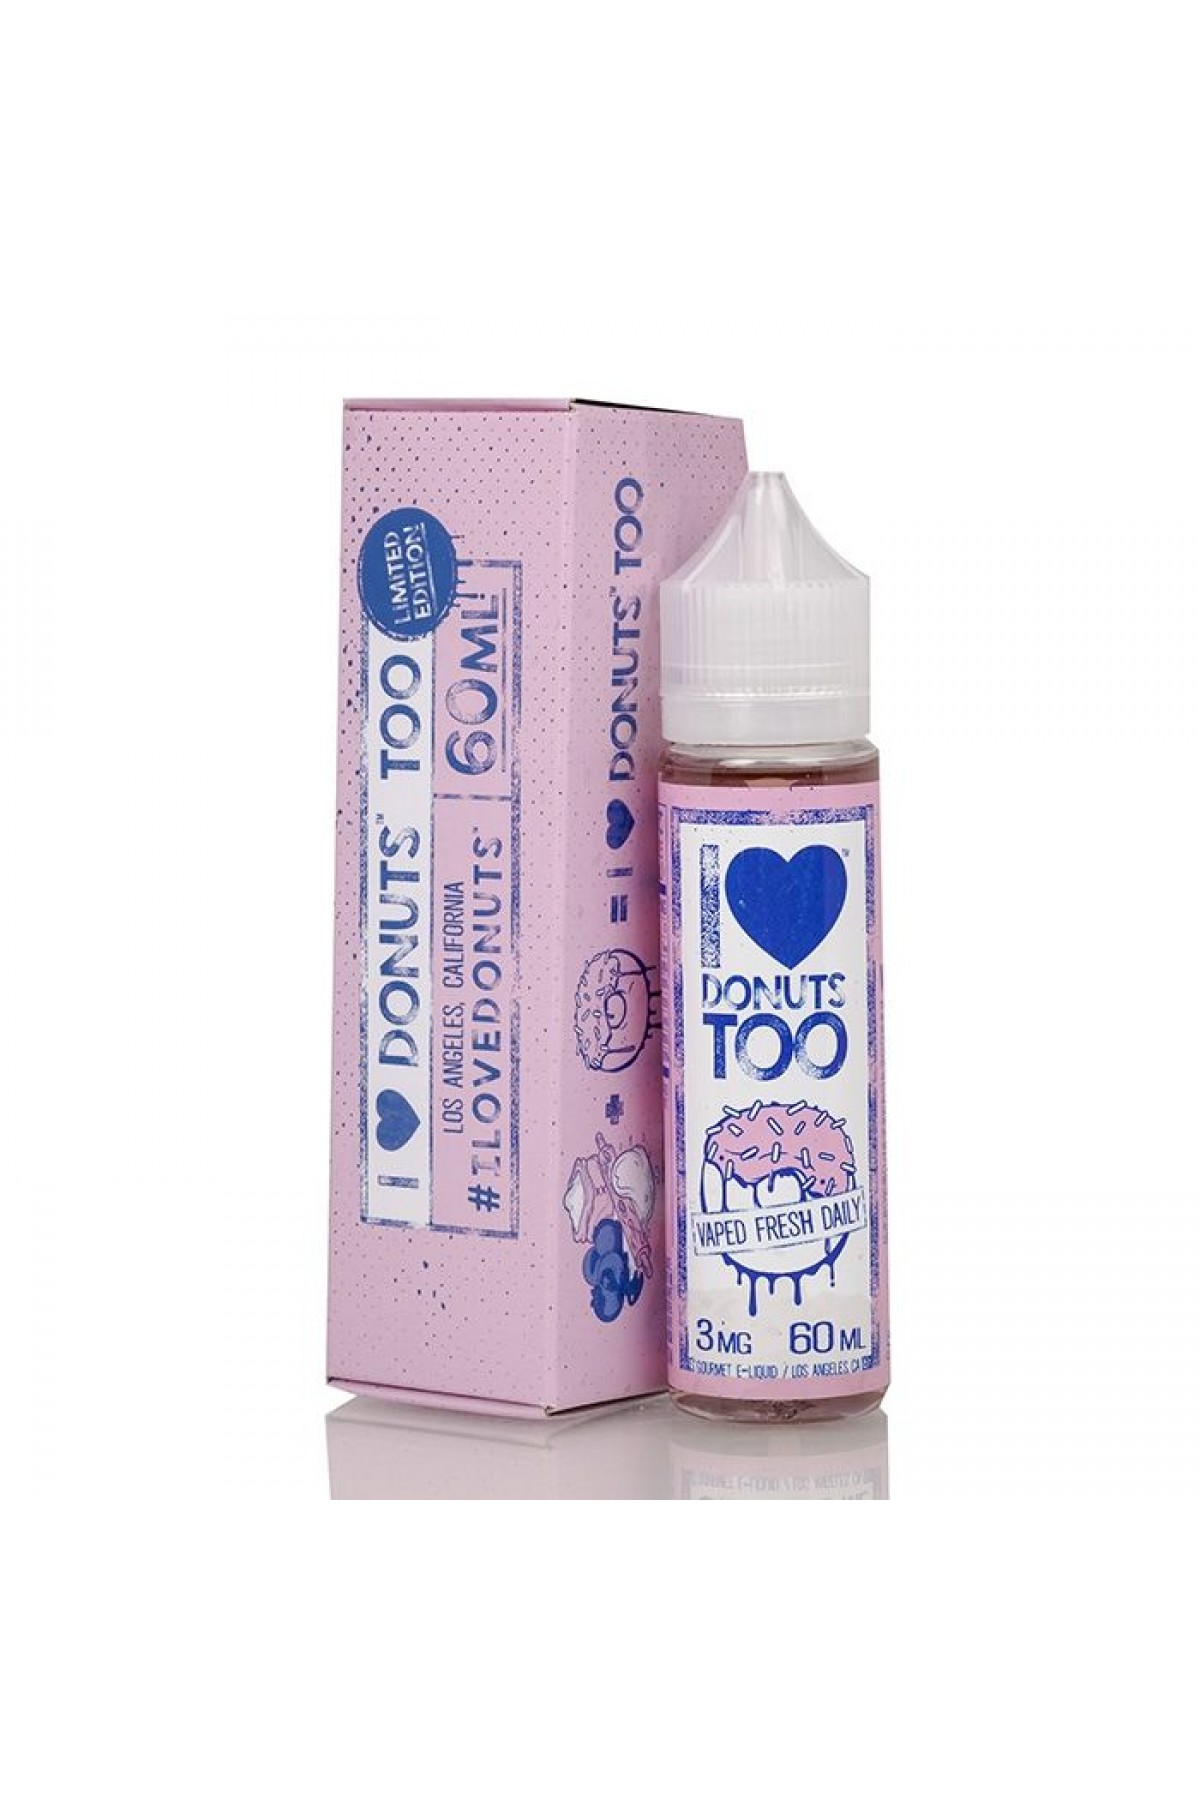 Mad Hatter Juice - I Love Donuts (60mL) E-Likit